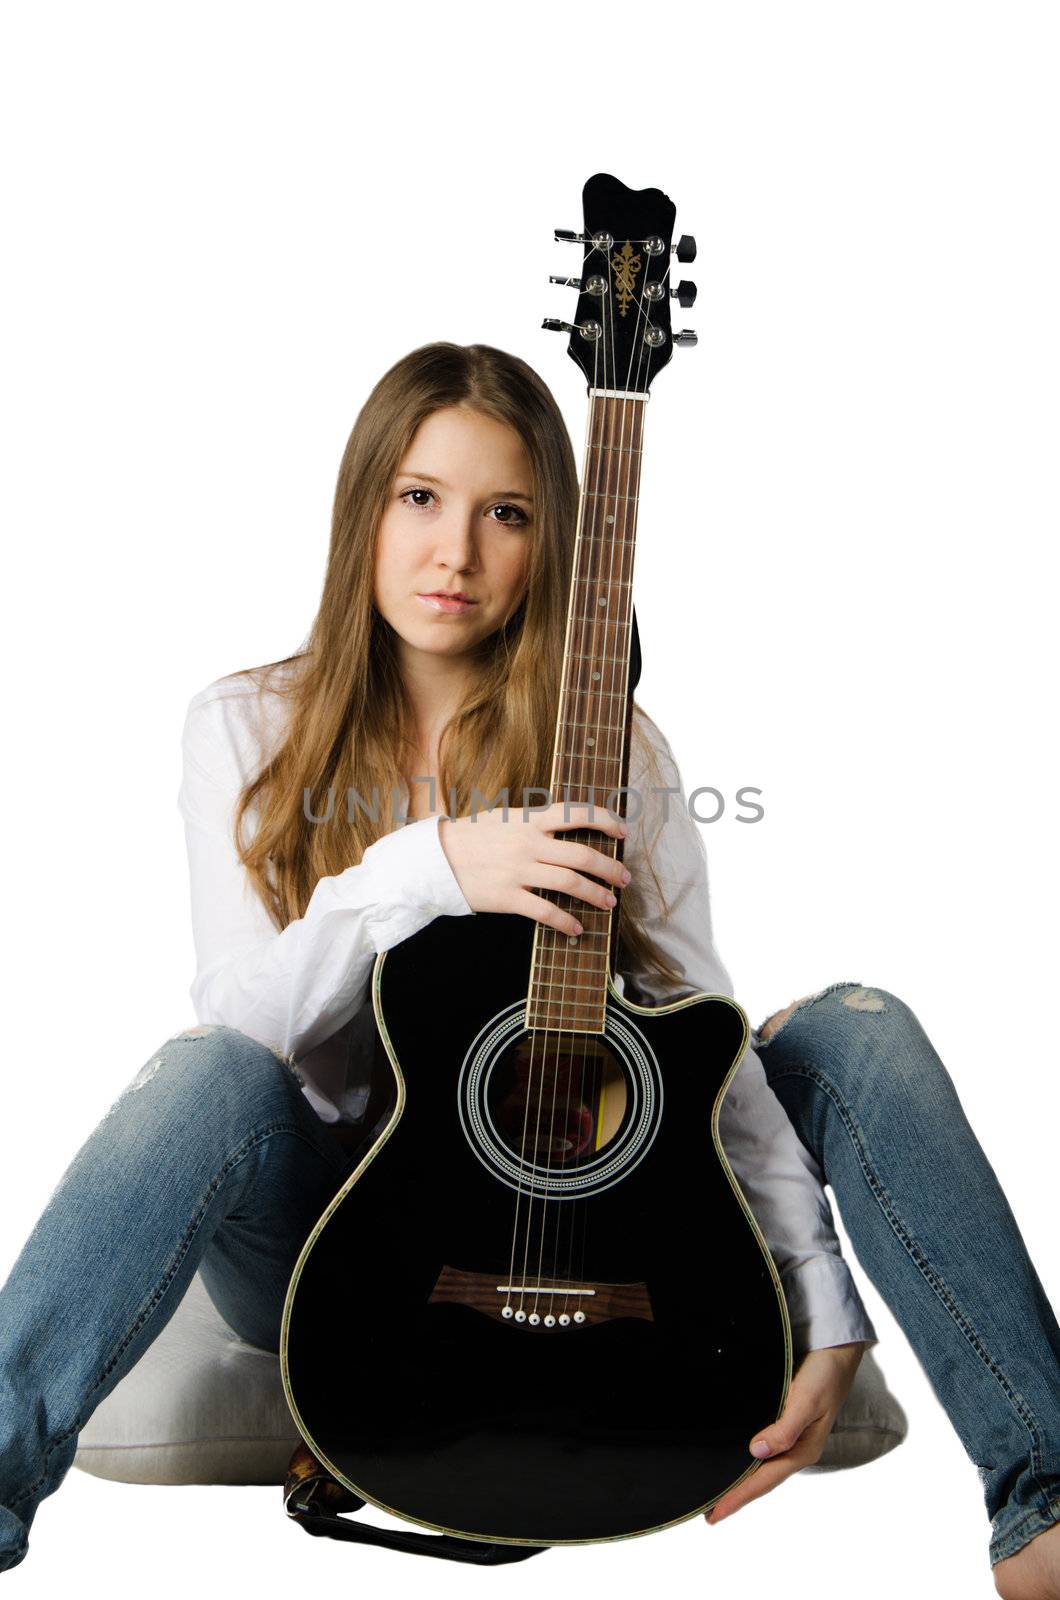 Isolate is a beautiful girl with a guitar